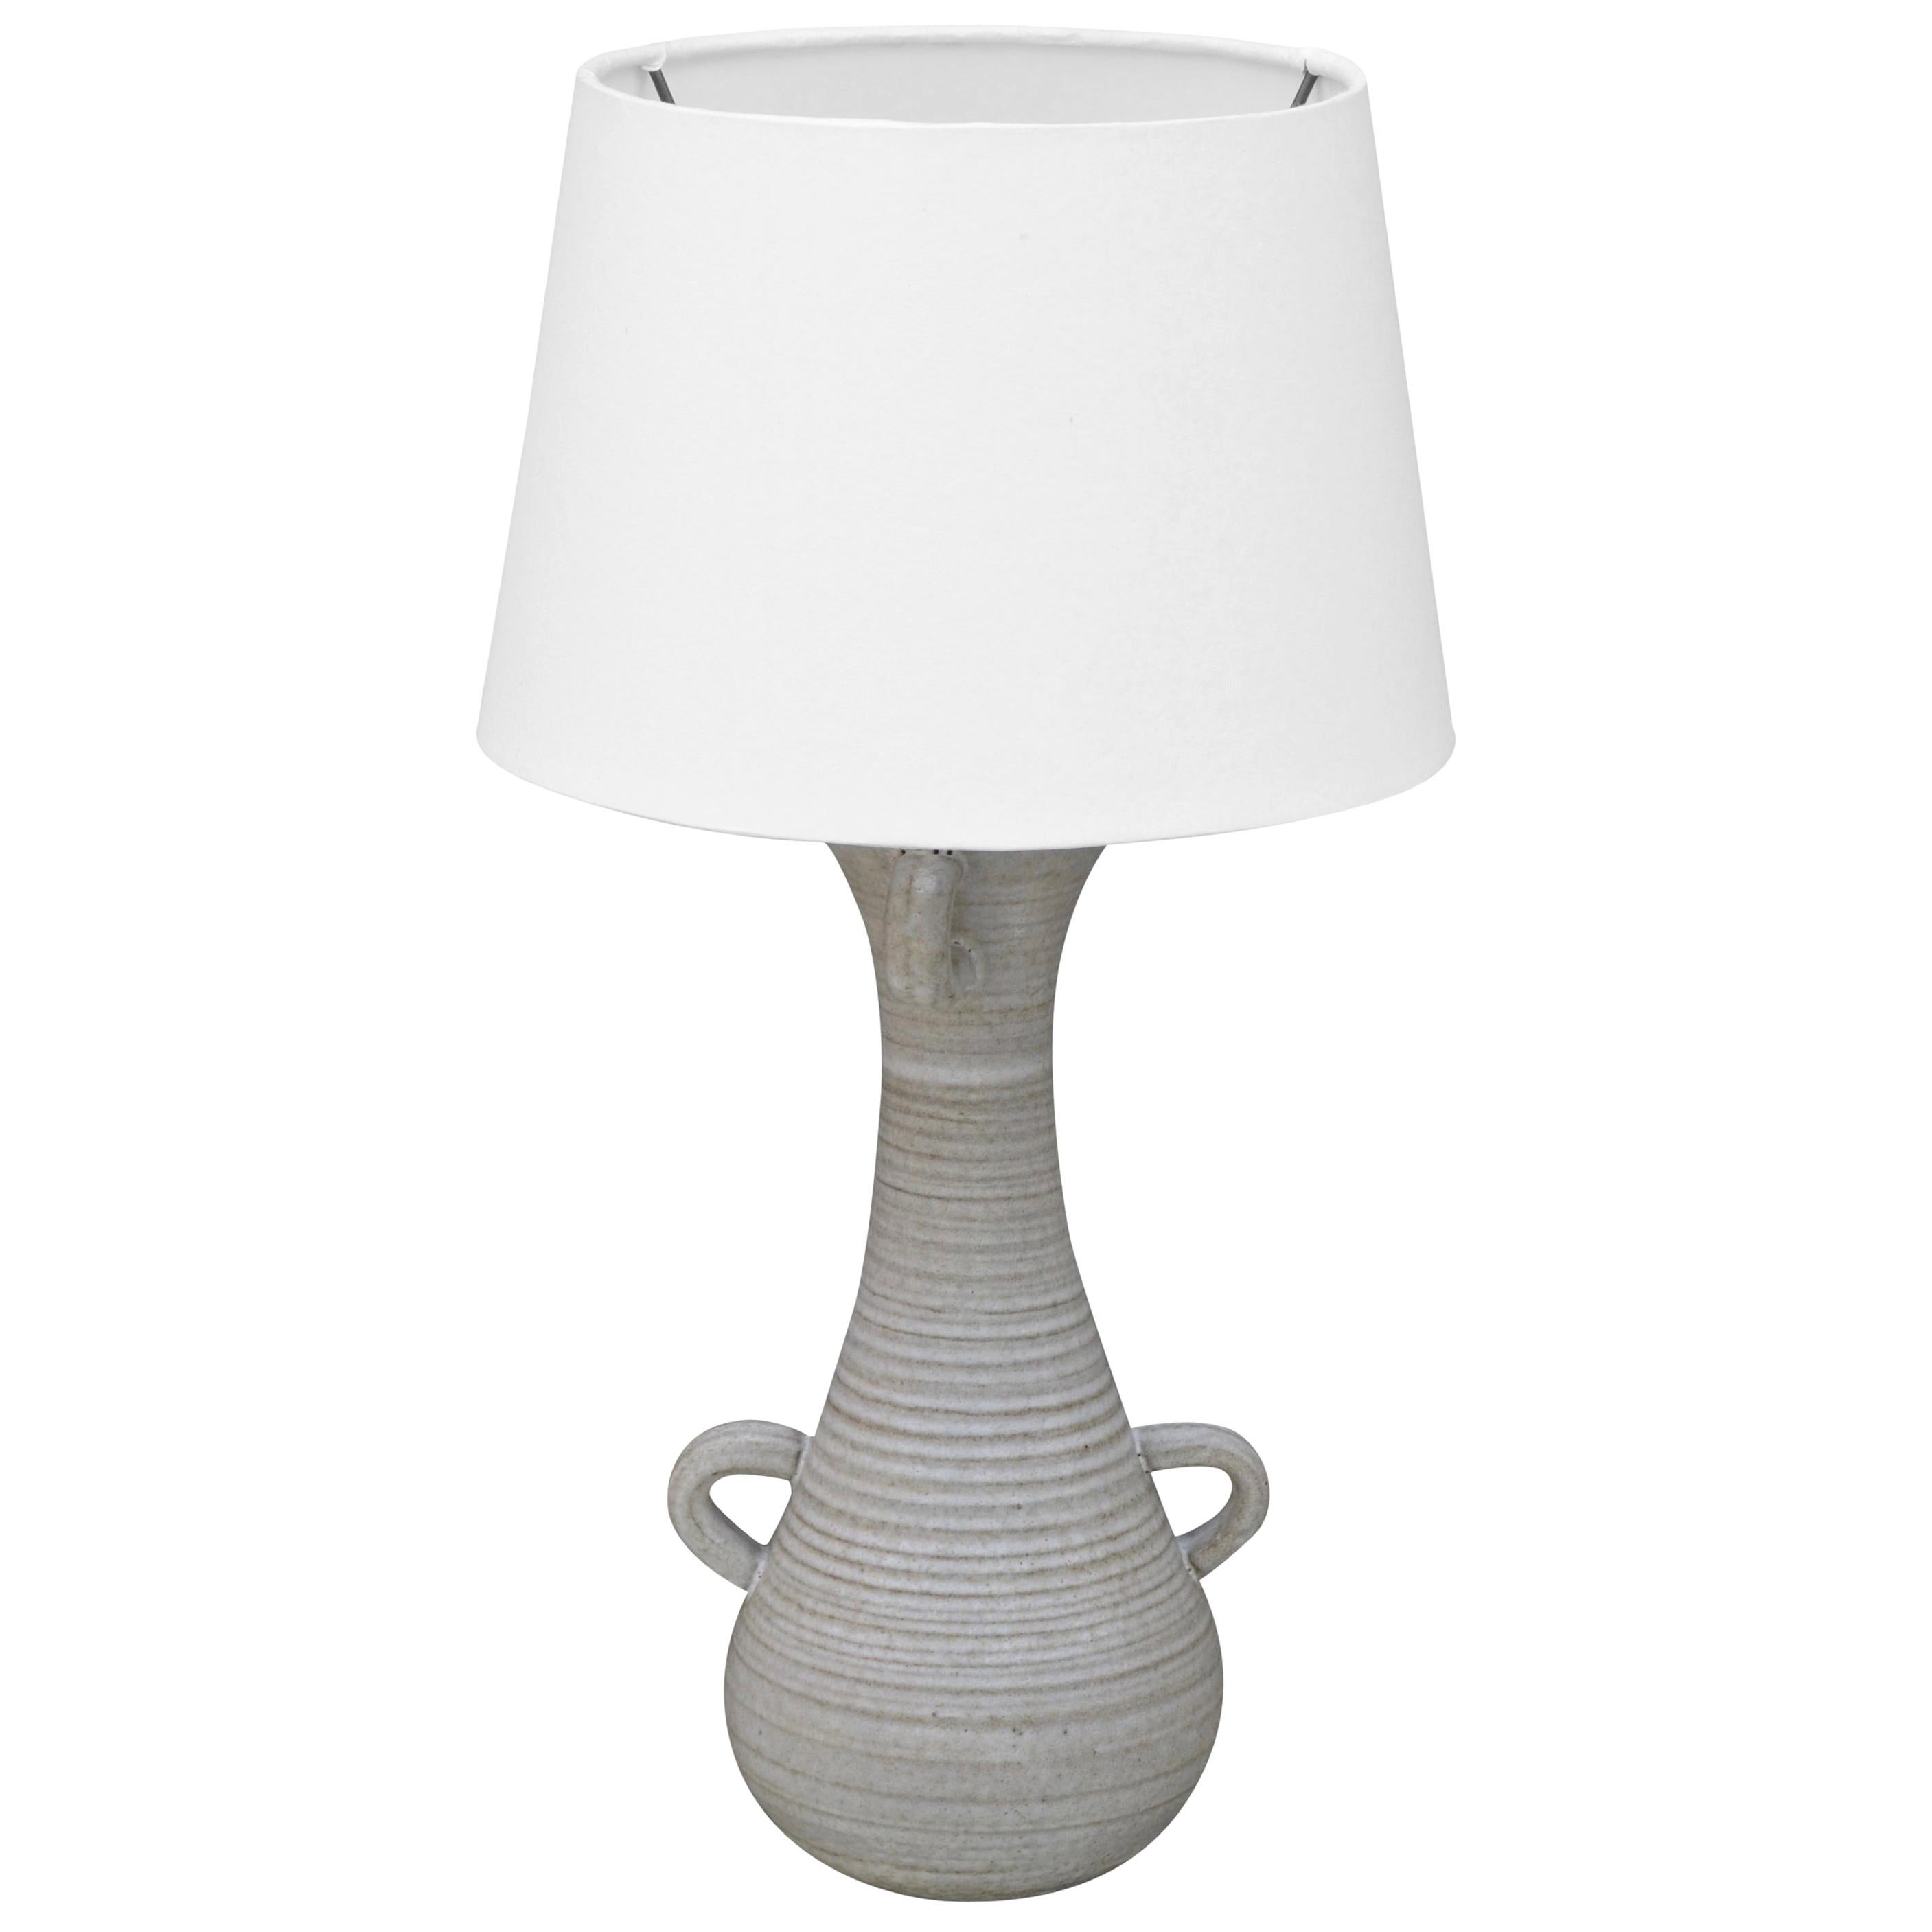 Chic Gourd Shaped Table Lamp with Custom White Parchment Shade